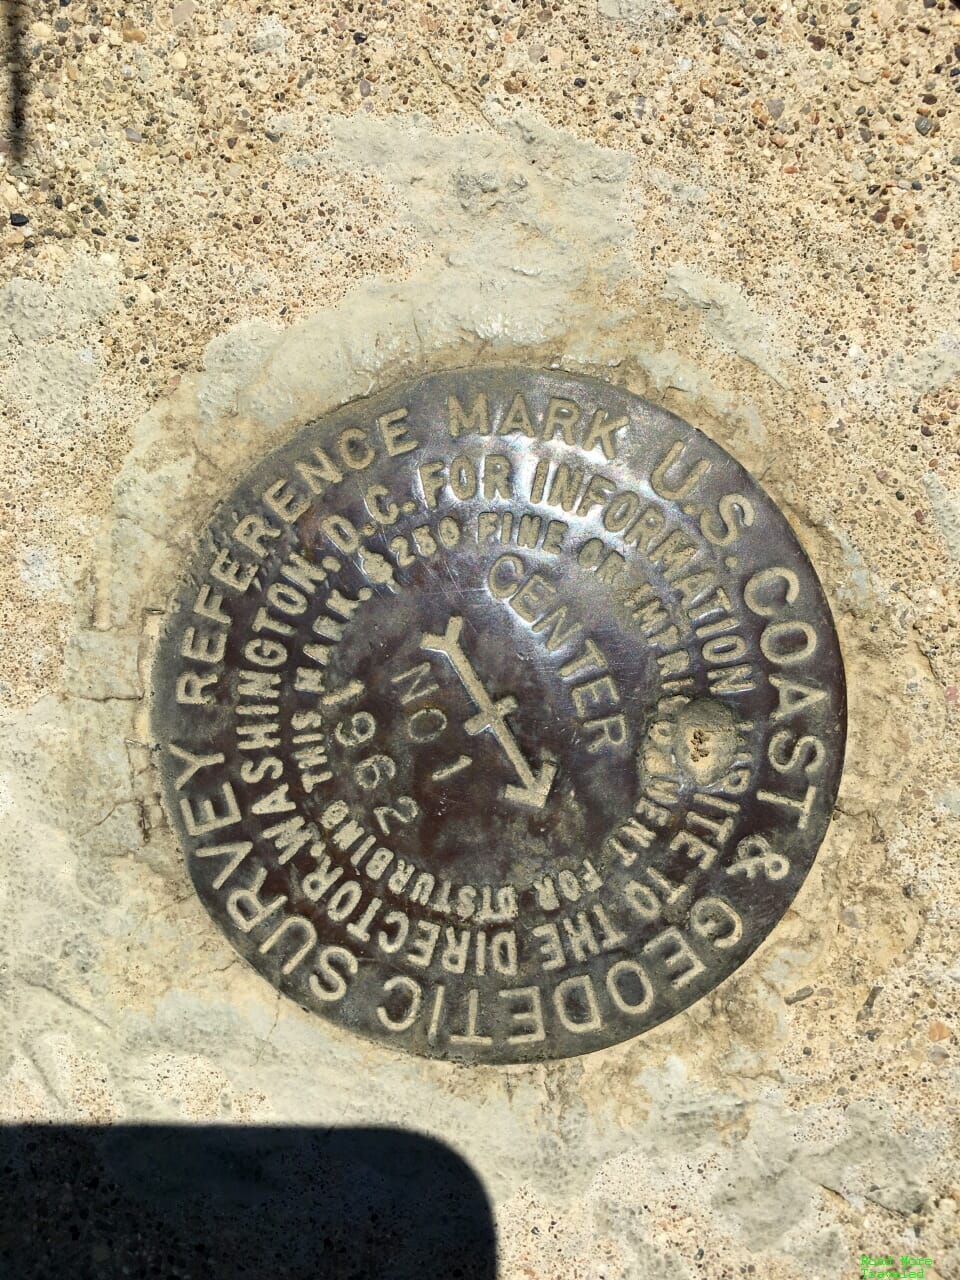 Journey to the Center of the USA - USGS marker in SD